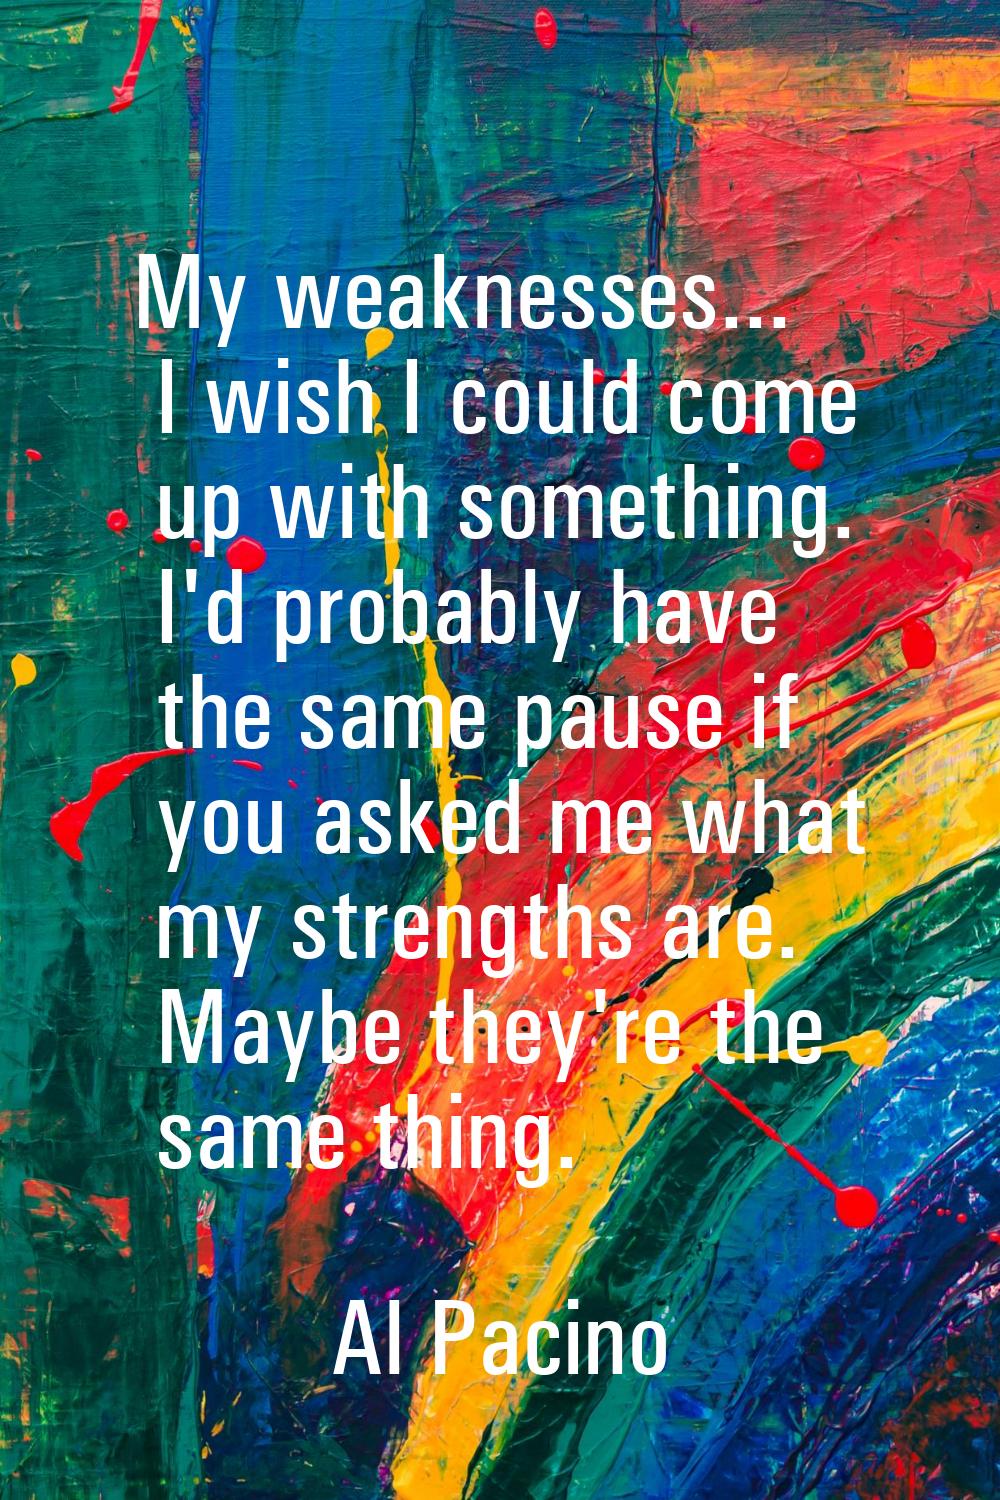 My weaknesses... I wish I could come up with something. I'd probably have the same pause if you ask